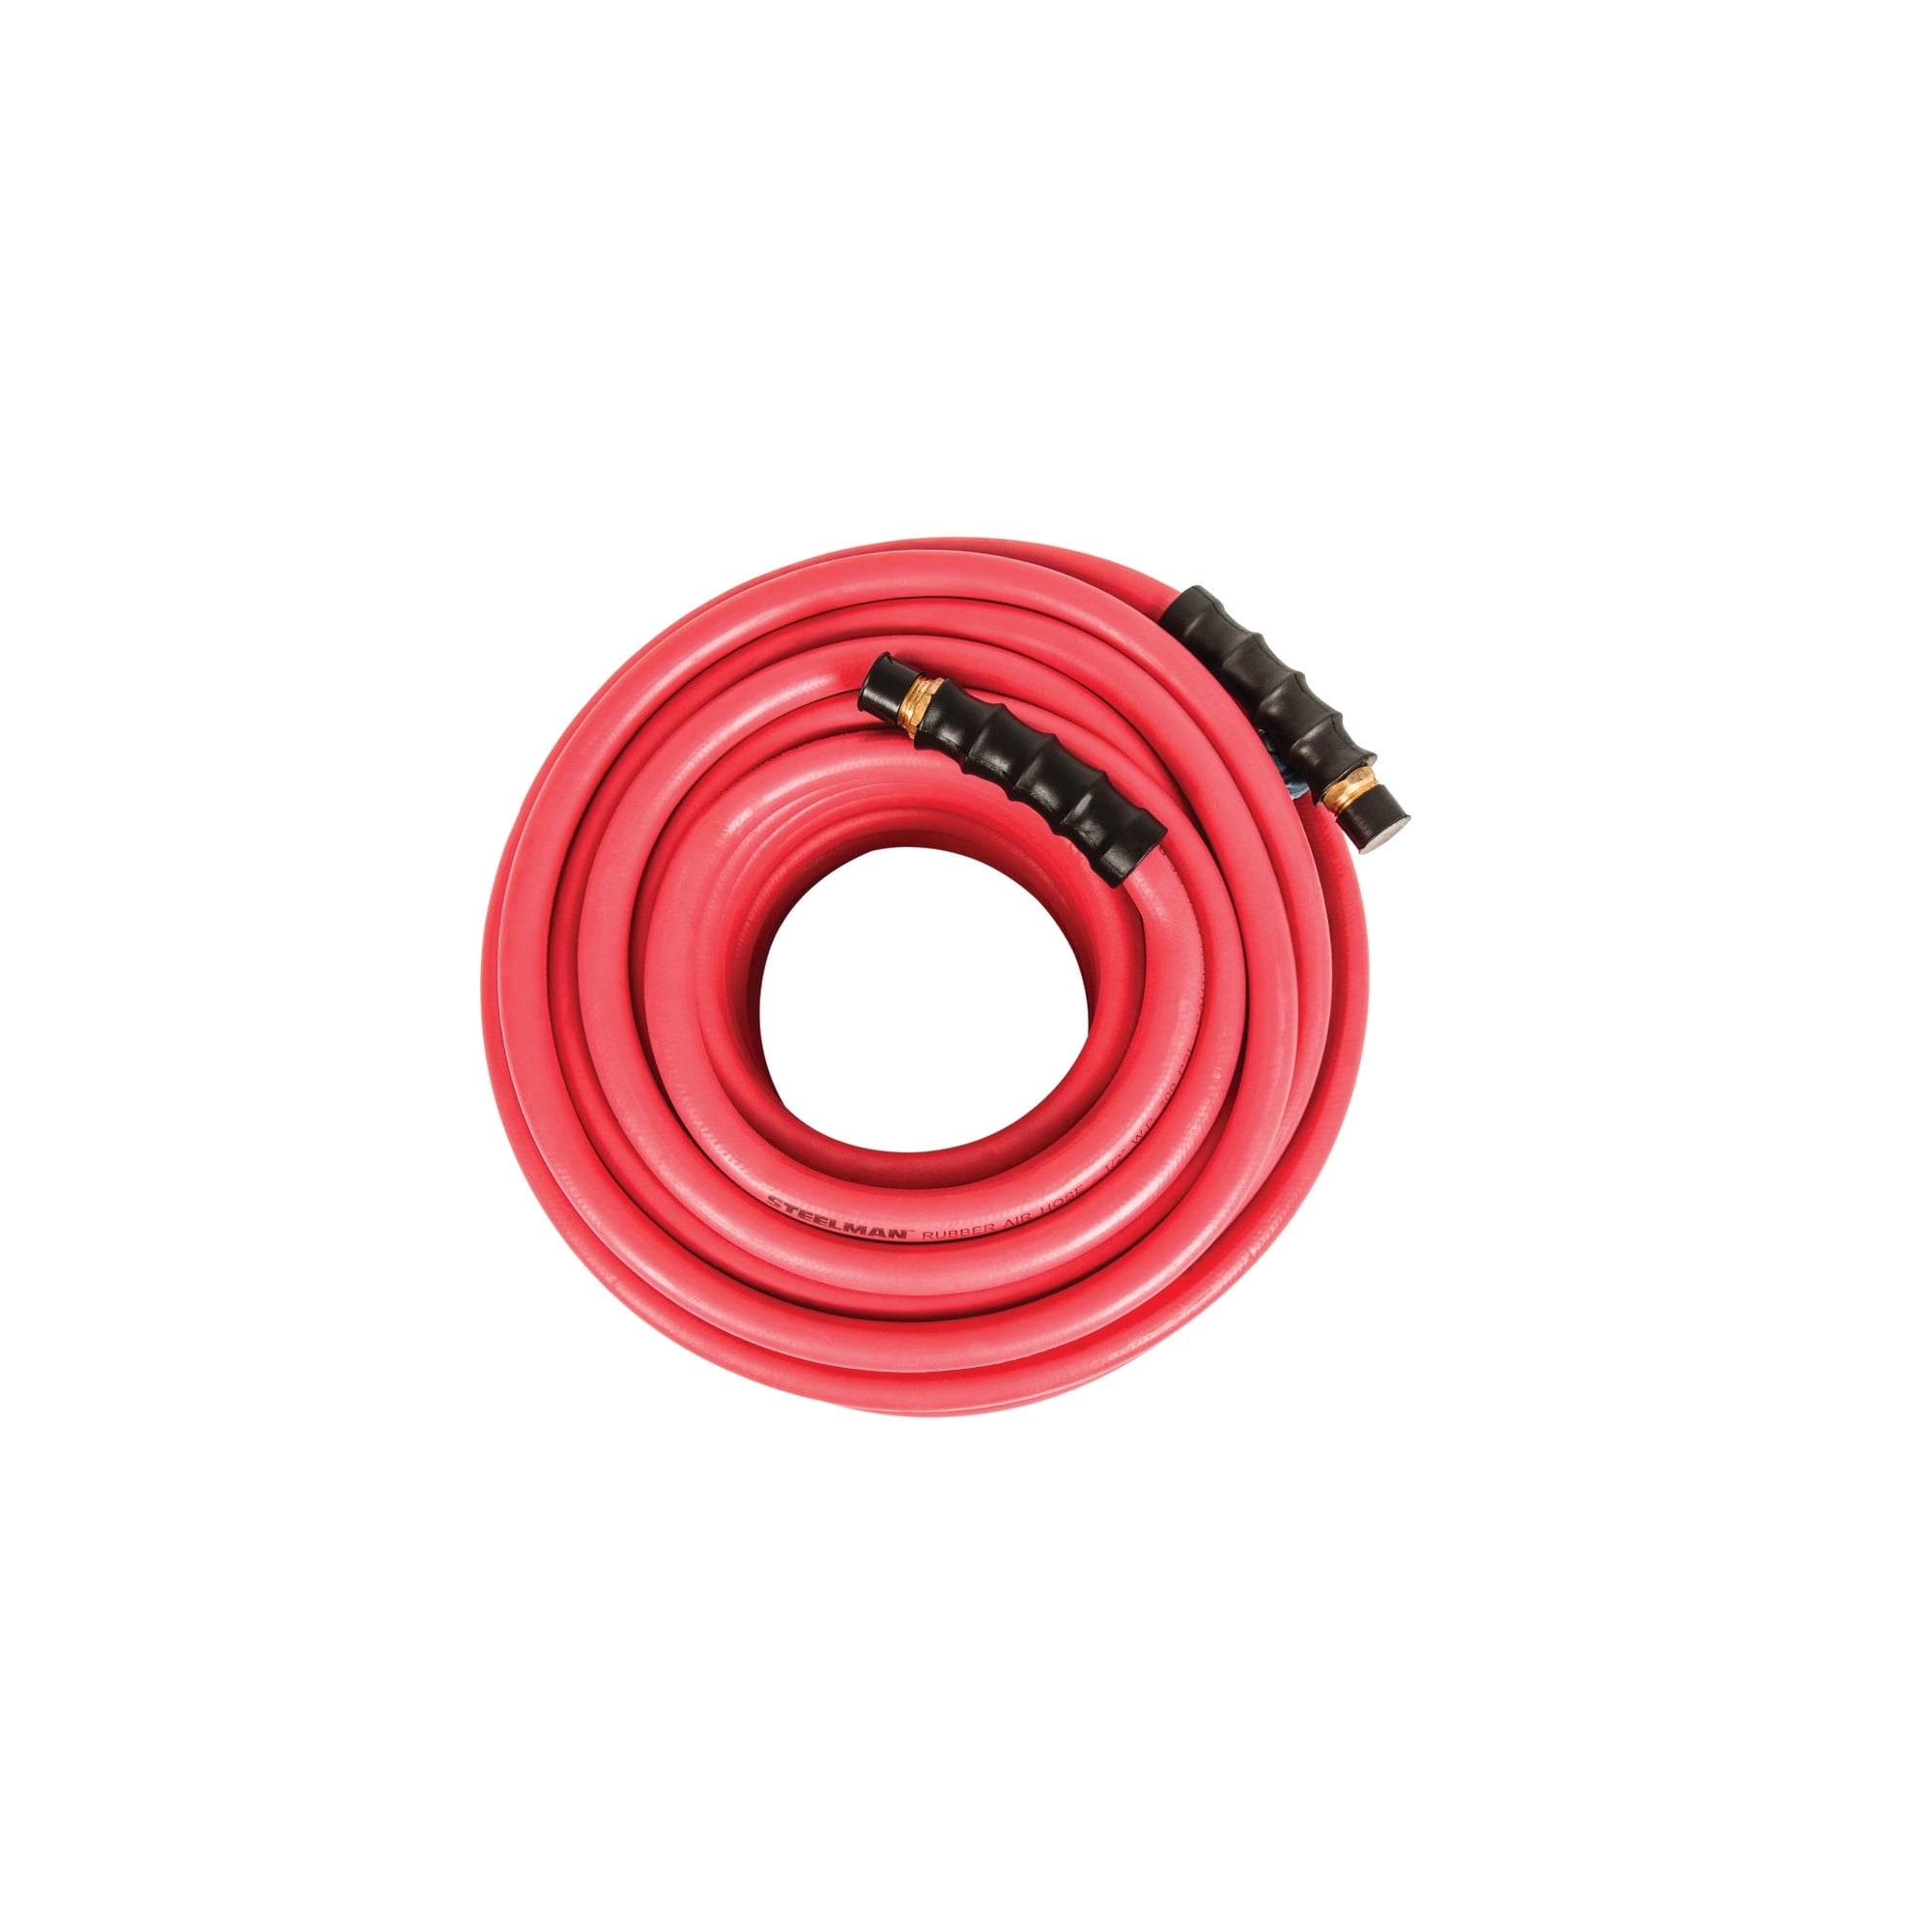 1/2" x 100 Ft Heavy Duty Air Hose Up to 300 PSI with Solid Brass MalebCouplings 